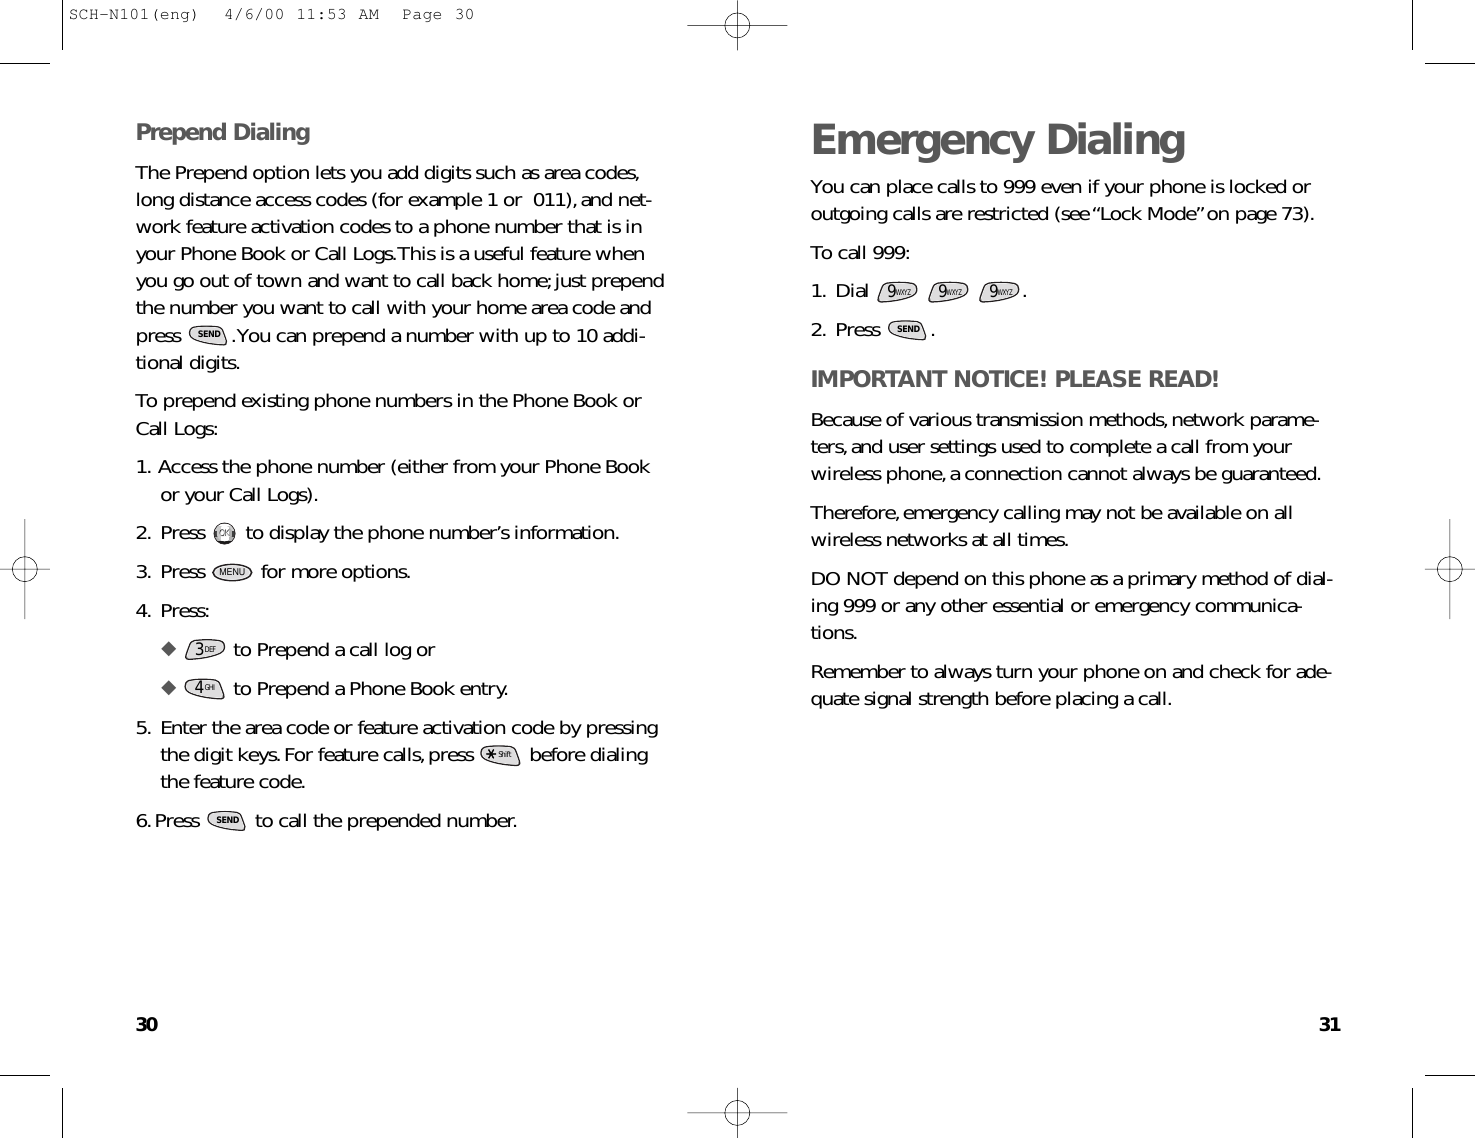 3130Emergency DialingYou can place calls to 999 even if your phone is locked oroutgoing calls are restricted (see “Lock Mode”on page 73).To call 999:1. Dial .2. Press .IMPORTANT NOTICE! PLEASE READ!Because of various transmission methods,network parame-ters,and user settings used to complete a call from yourwireless phone,a connection cannot always be guaranteed.Therefore,emergency calling may not be available on allwireless networks at all times.DO NOT depend on this phone as a primary method of dial-ing 999 or any other essential or emergency communica-tions.Remember to always turn your phone on and check for ade-quate signal strength before placing a call.SEND9WXYZ9WXYZ9WXYZPrepend DialingThe Prepend option lets you add digits such as area codes,long distance access codes (for example 1 or  011),and net-work feature activation codes to a phone number that is inyour Phone Book or Call Logs.This is a useful feature whenyou go out of town and want to call back home;just prependthe number you want to call with your home area code andpress  .You can prepend a number with up to 10 addi-tional digits.To prepend existing phone numbers in the Phone Book orCall Logs:1. Access the phone number (either from your Phone Bookor your Call Logs).2. Press  to display the phone number’s information.3. Press  for more options.4. Press:◆to Prepend a call log or◆to Prepend a Phone Book entry.5. Enter the area code or feature activation code by pressingthe digit keys.For feature calls,press  before dialingthe feature code.6.Press  to call the prepended number.SENDShiftGHI43DEFMENUOKOKSENDSCH-N101(eng)  4/6/00 11:53 AM  Page 30